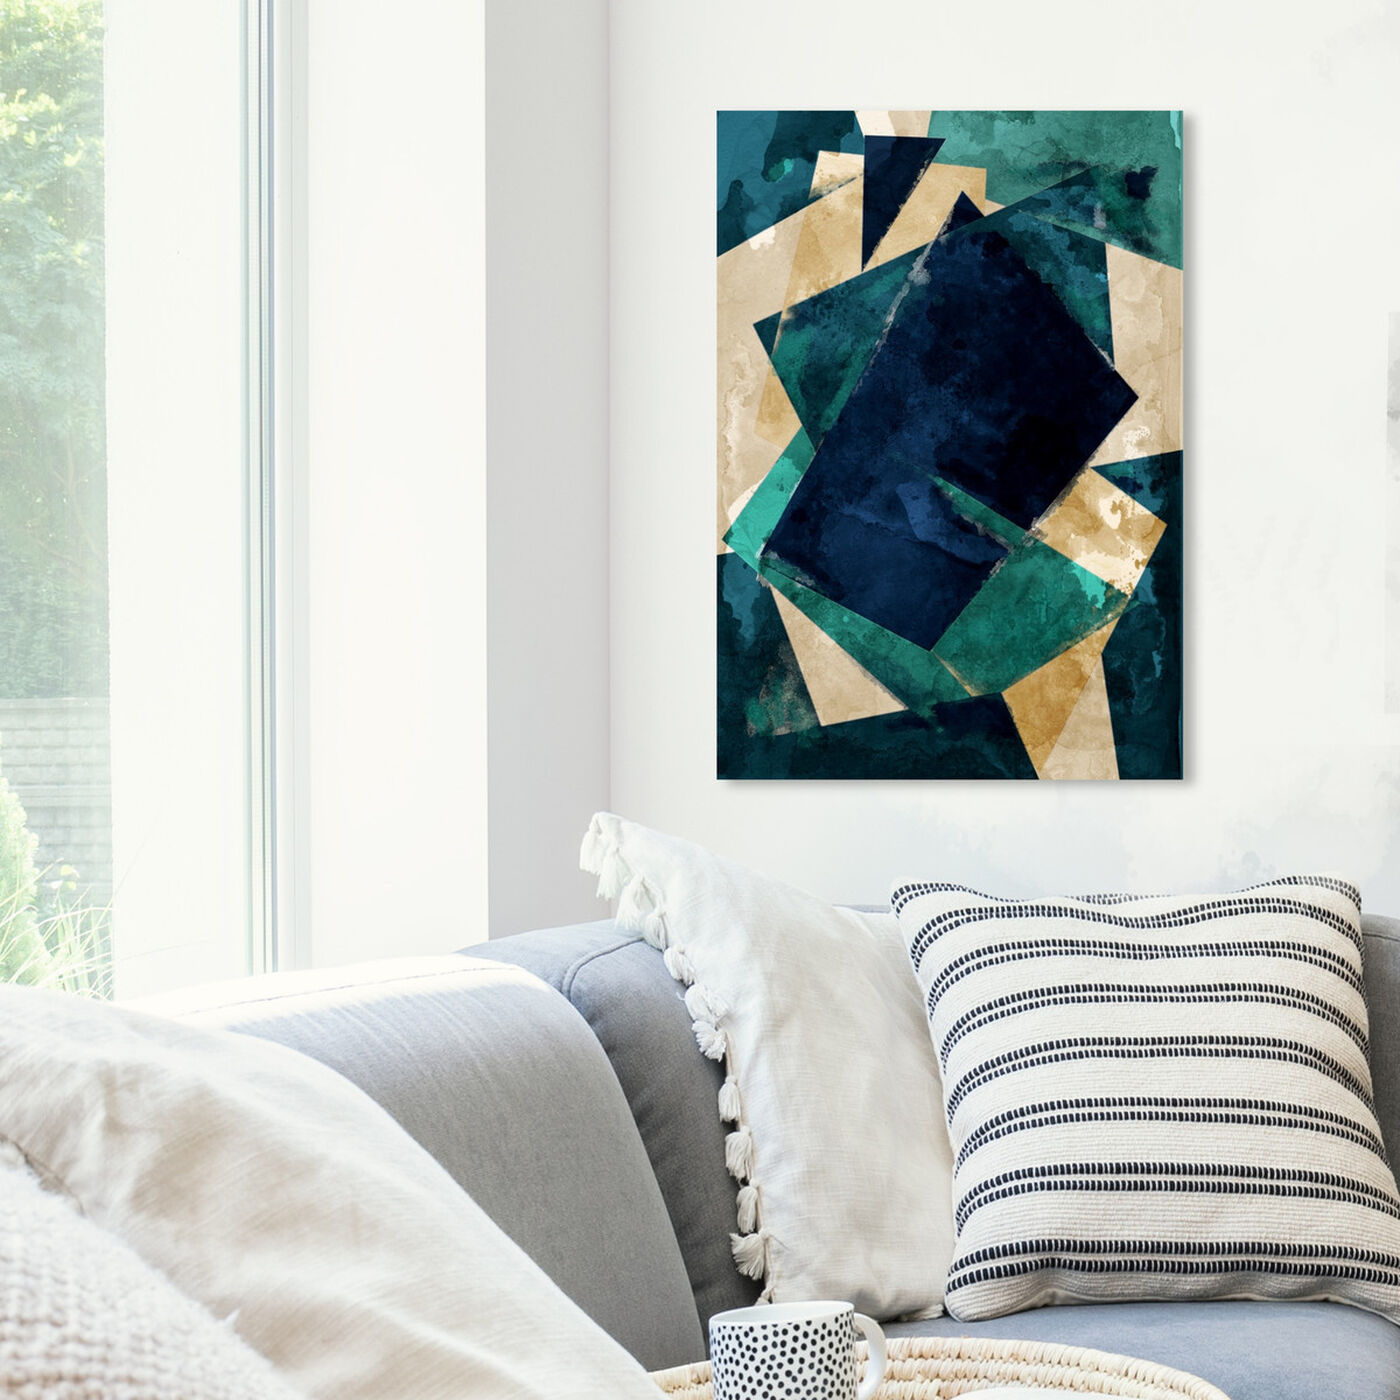 Hanging view of Abstracta Dos featuring abstract and geometric art.